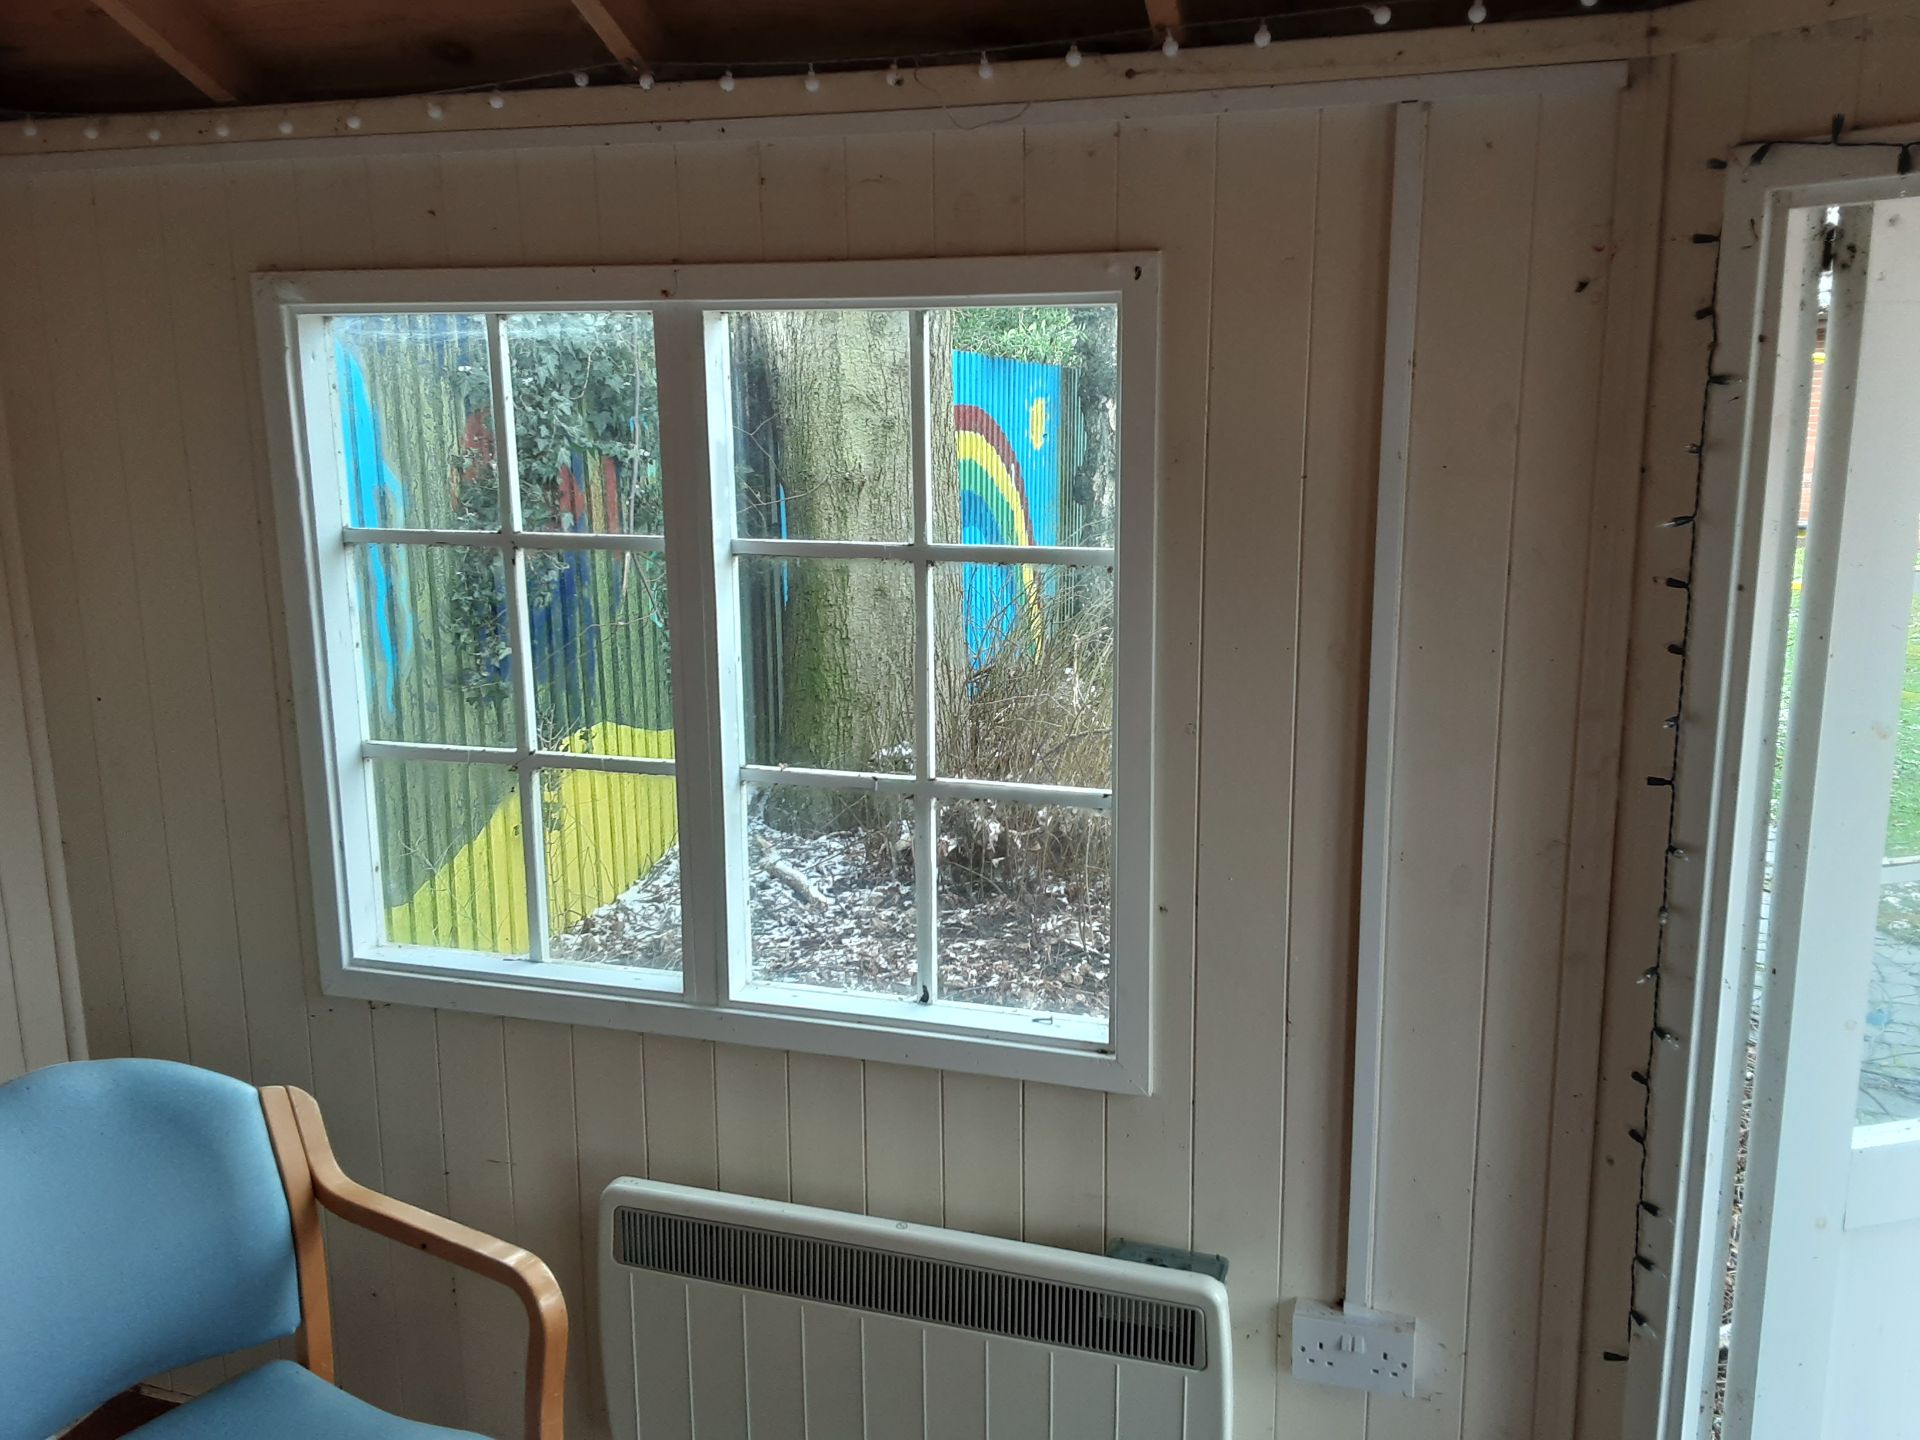 Summer House to include Inside Contents - Image 10 of 13